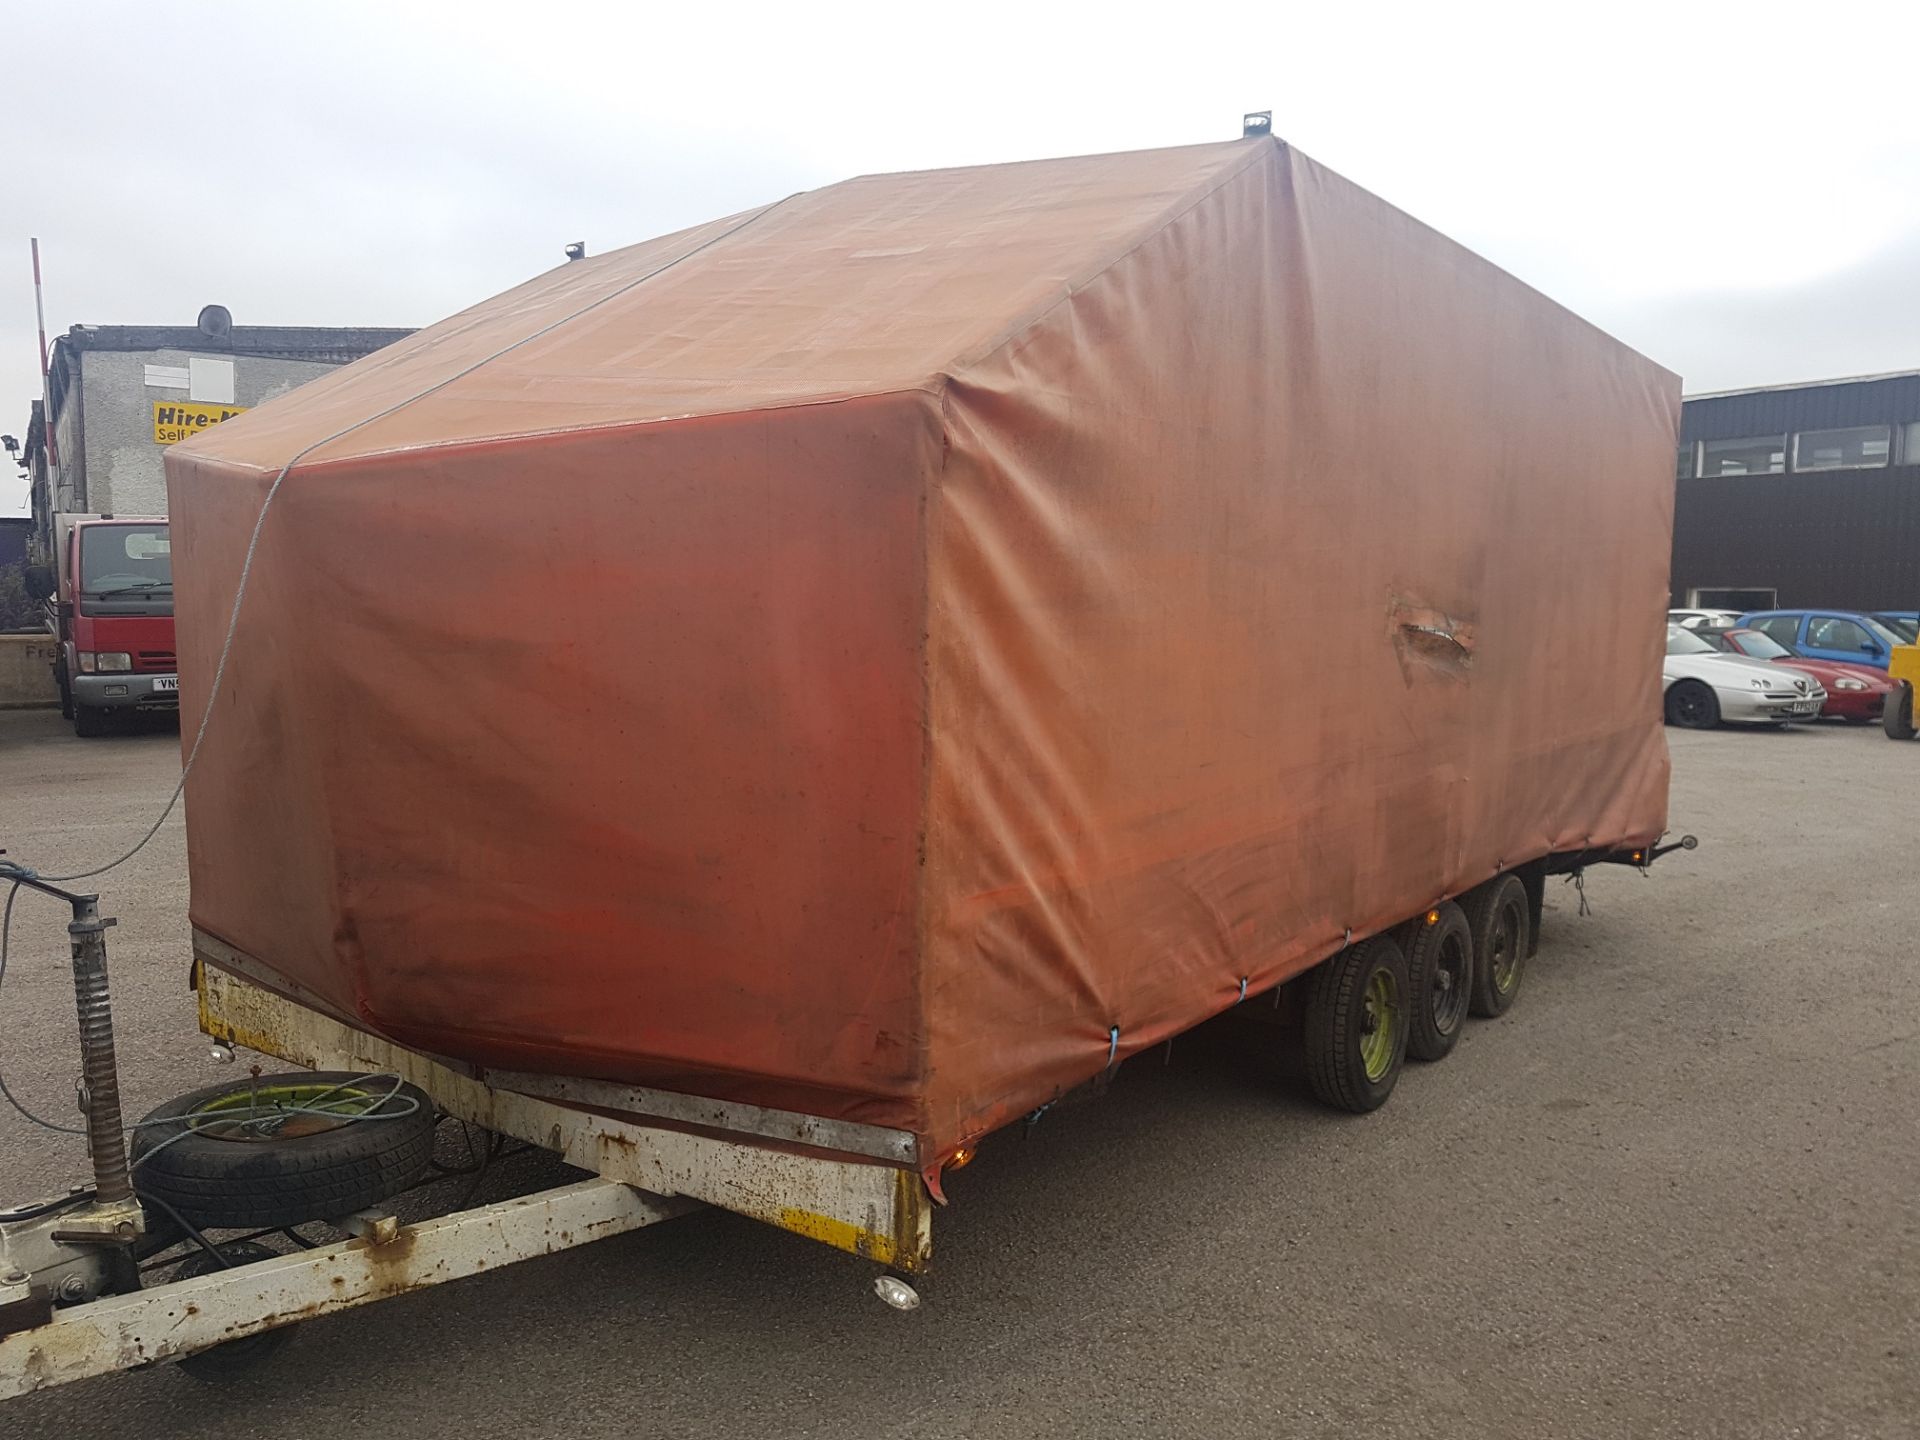 TRI-AXLE BEAVER-TAIL CAR TRANSPORTER COVERED TRAILER - 5.5 METRE BED LENGTH! *PLUS VAT* - Image 3 of 14